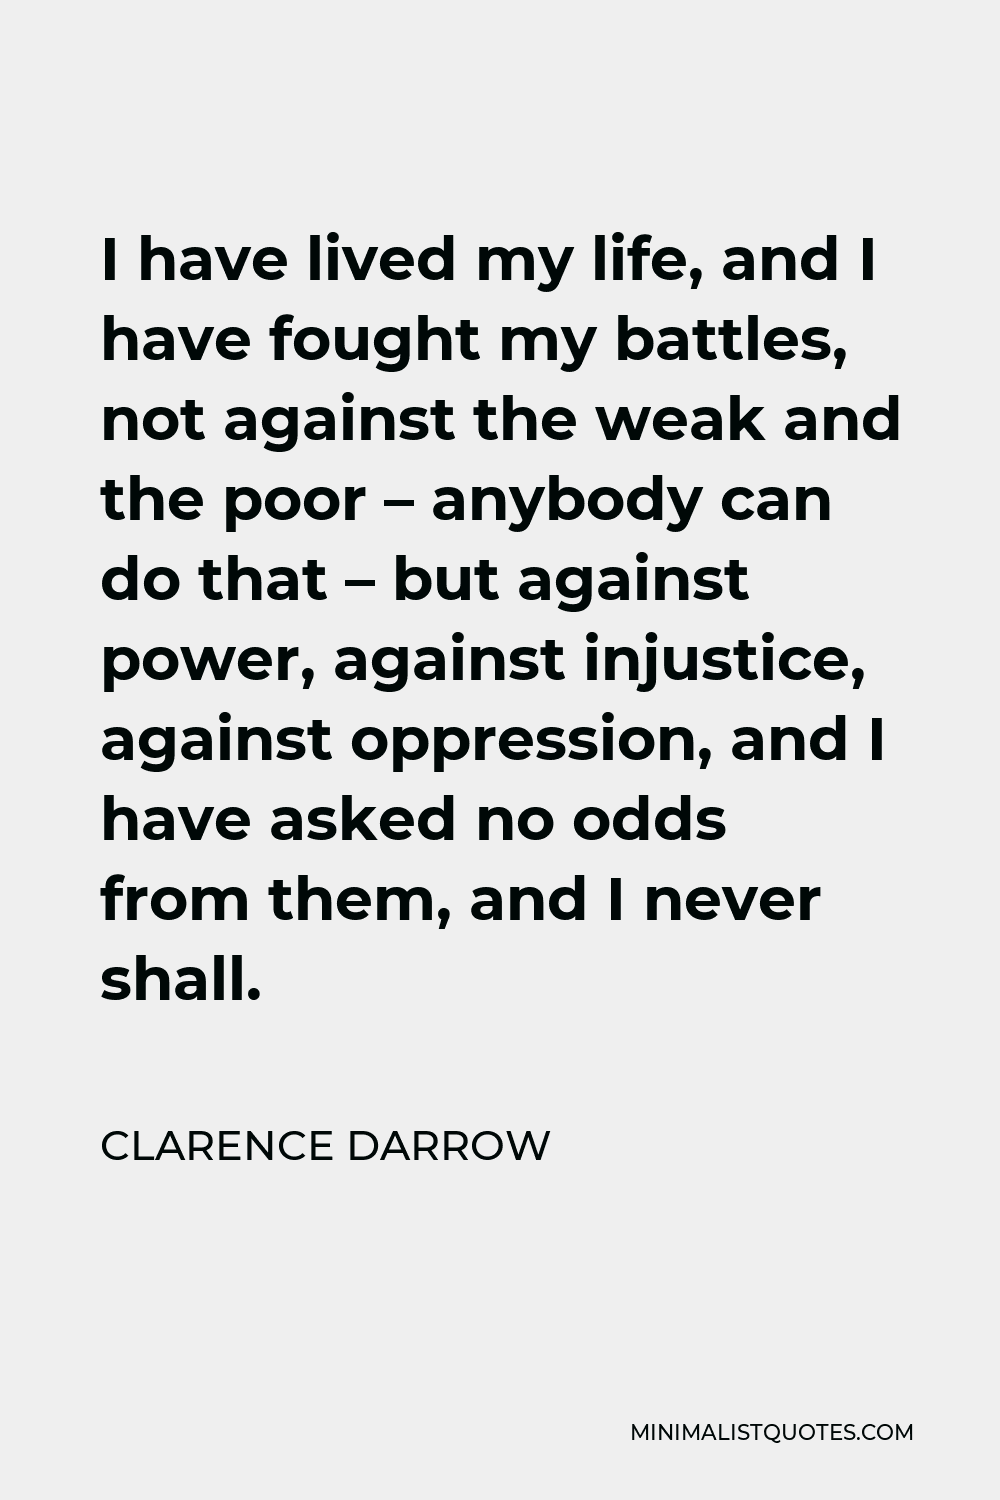 Clarence Darrow Quote - I have lived my life, and I have fought my battles, not against the weak and the poor – anybody can do that – but against power, against injustice, against oppression, and I have asked no odds from them, and I never shall.